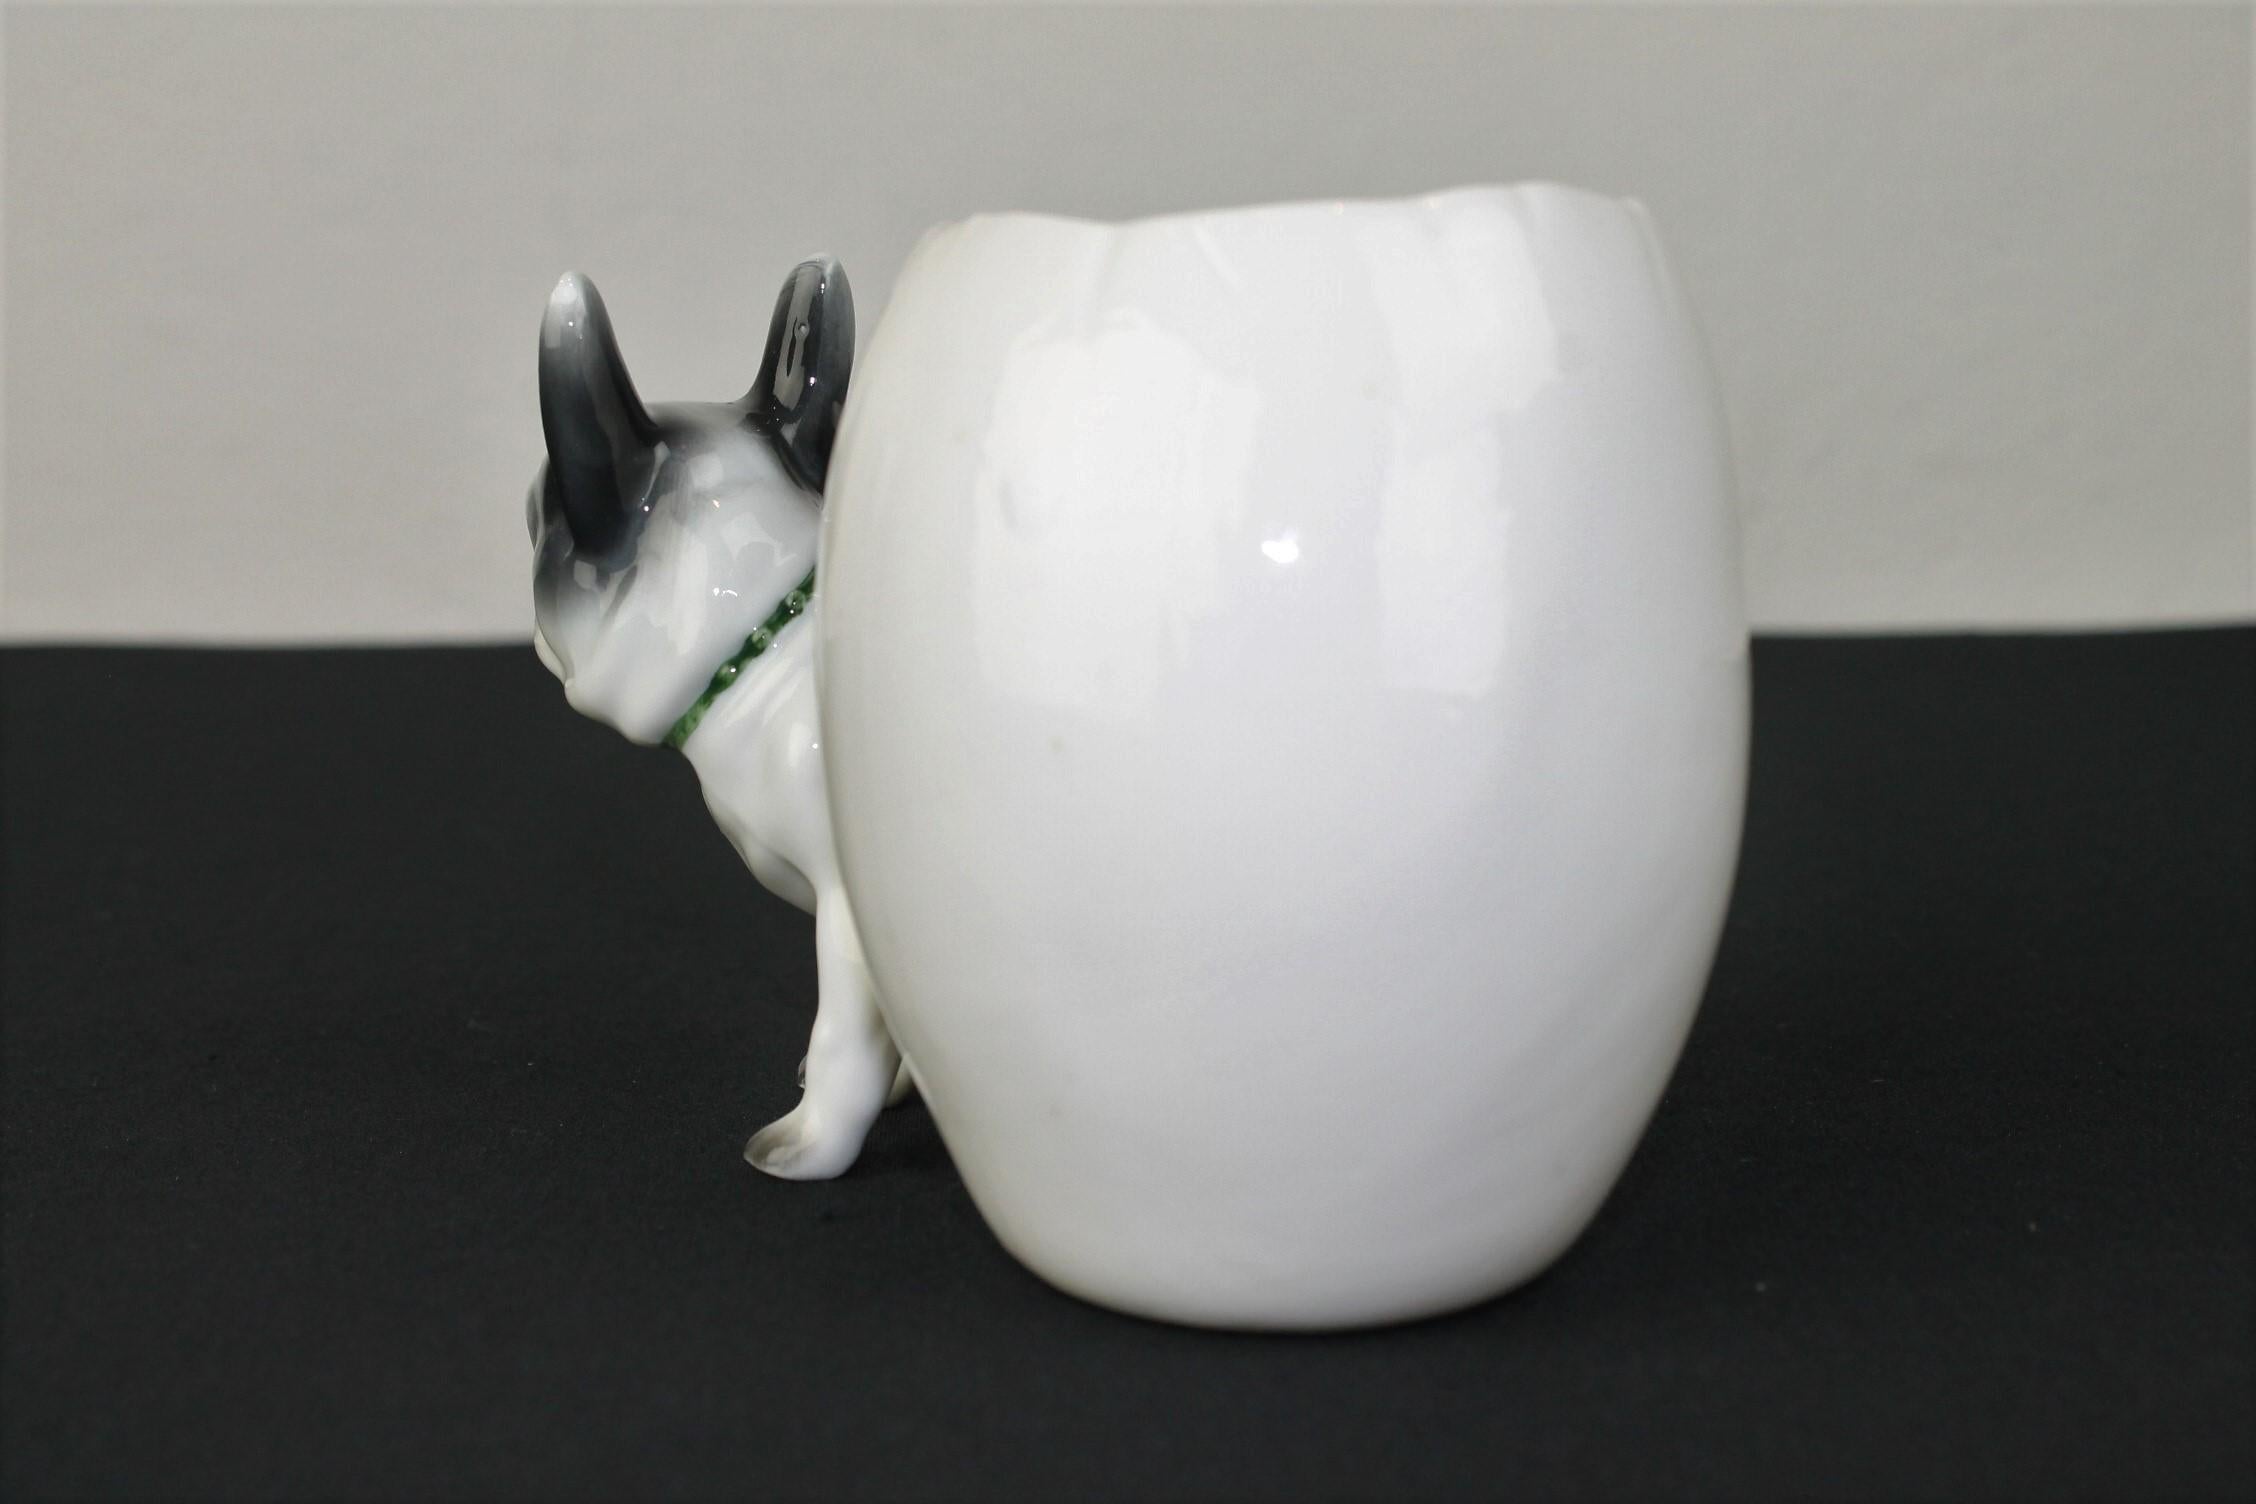 German Porcelain French Bulldog Sculpture with Storage Pot or Planter For Sale